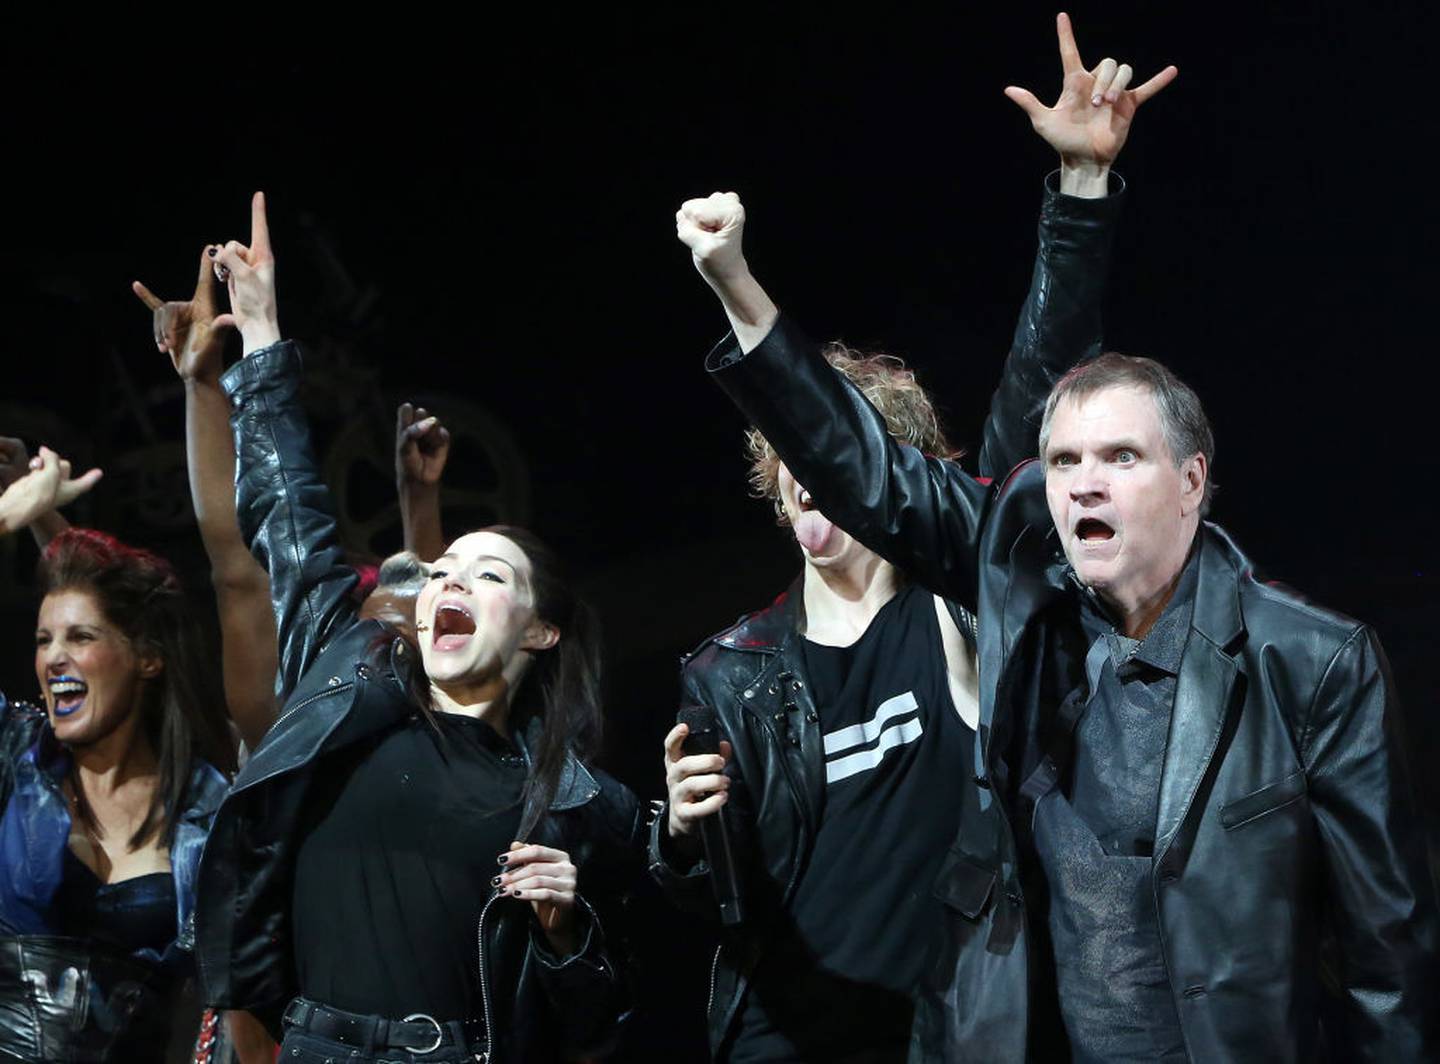 Meat Loaf joins the cast as a special guest as he visits the musical Bat Out Of Hell on Broadway at New York City Centre in 2019. Photo / Getty Images